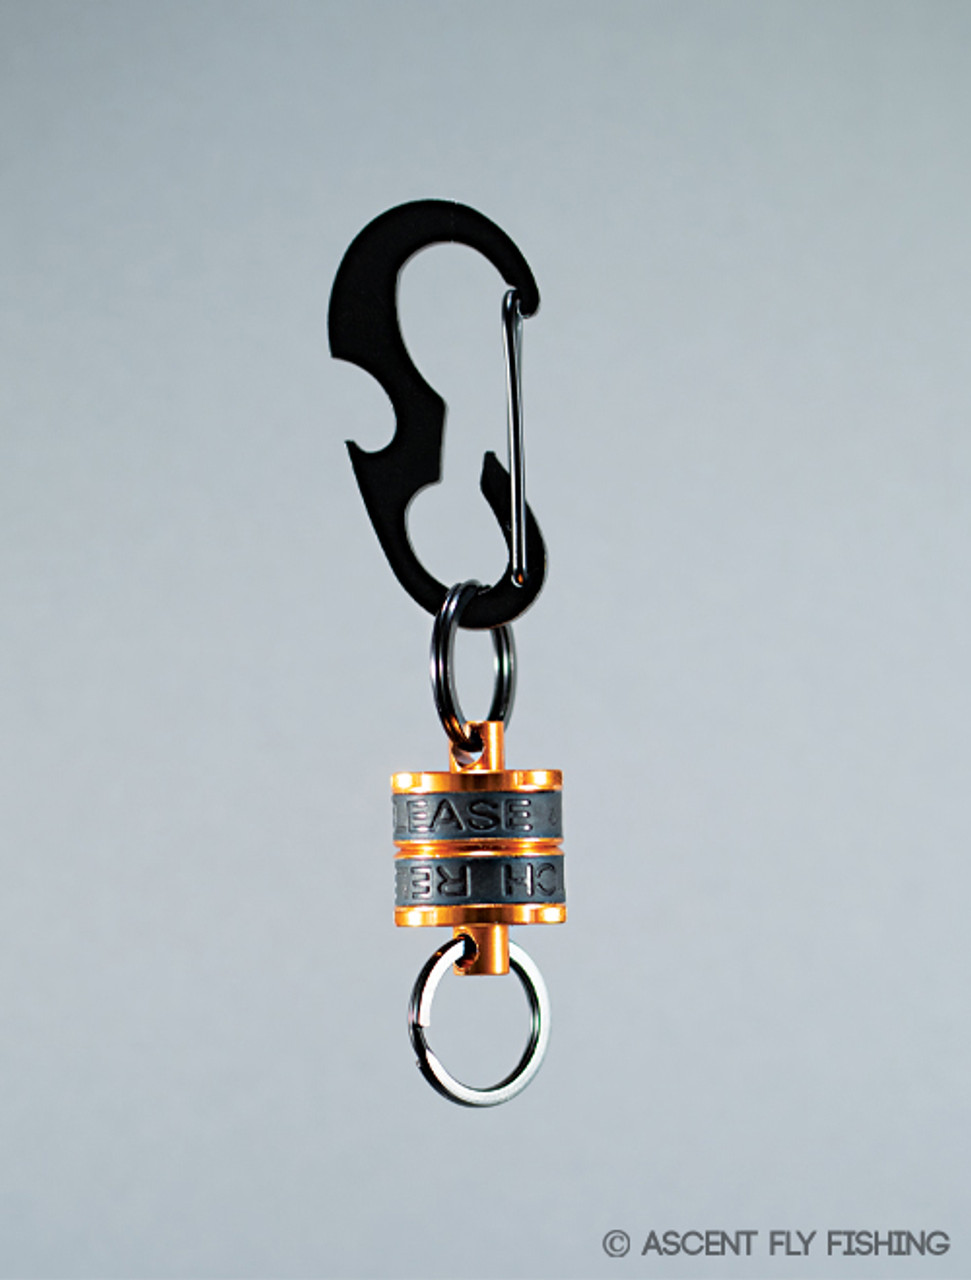 XL Magnetic Fishing Net Release - Ascent Fly Fishing